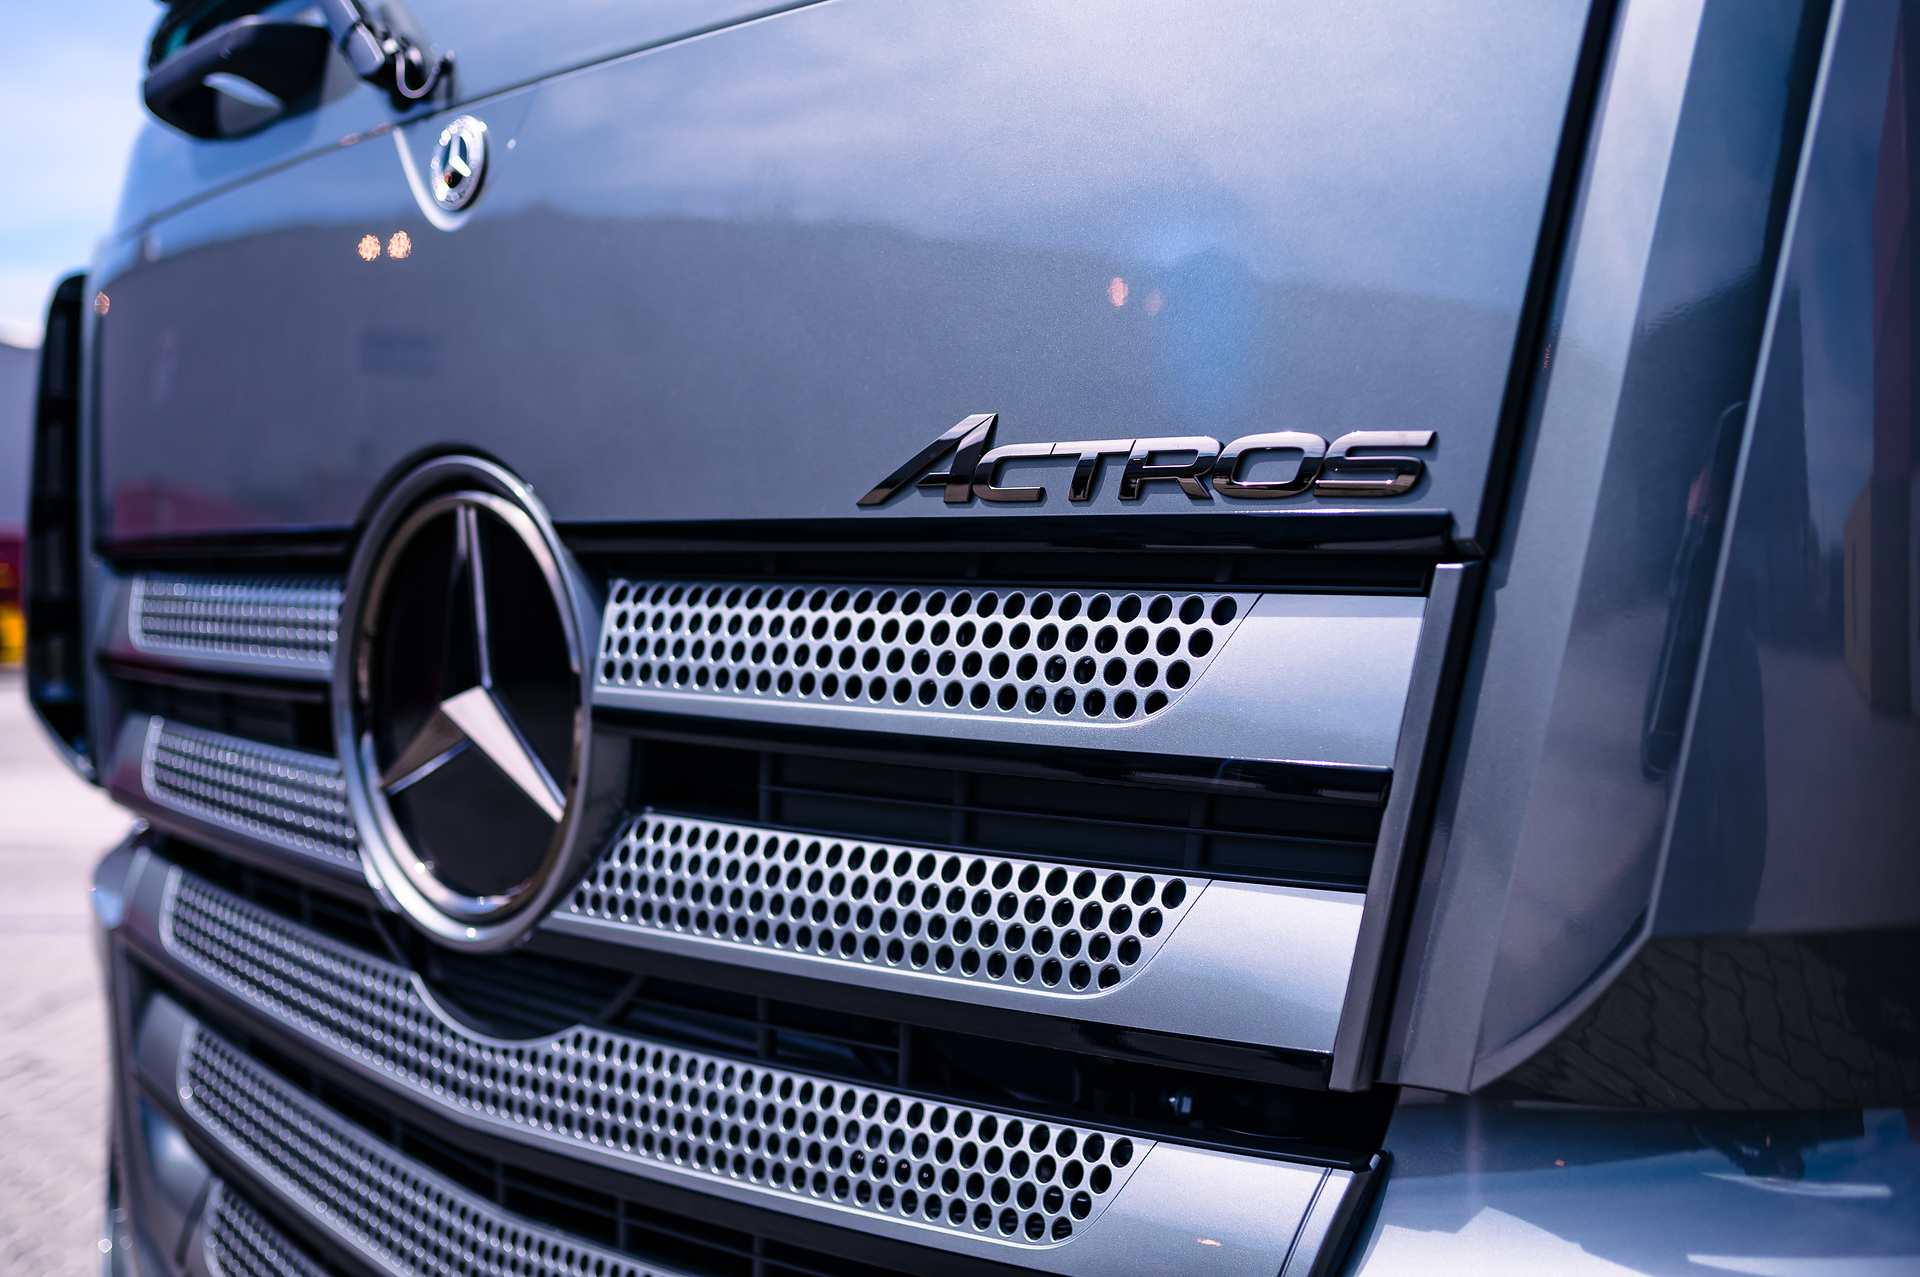 Mercedes-Benz Actros Edition 2 – The first of 400 Highway Stars is completed